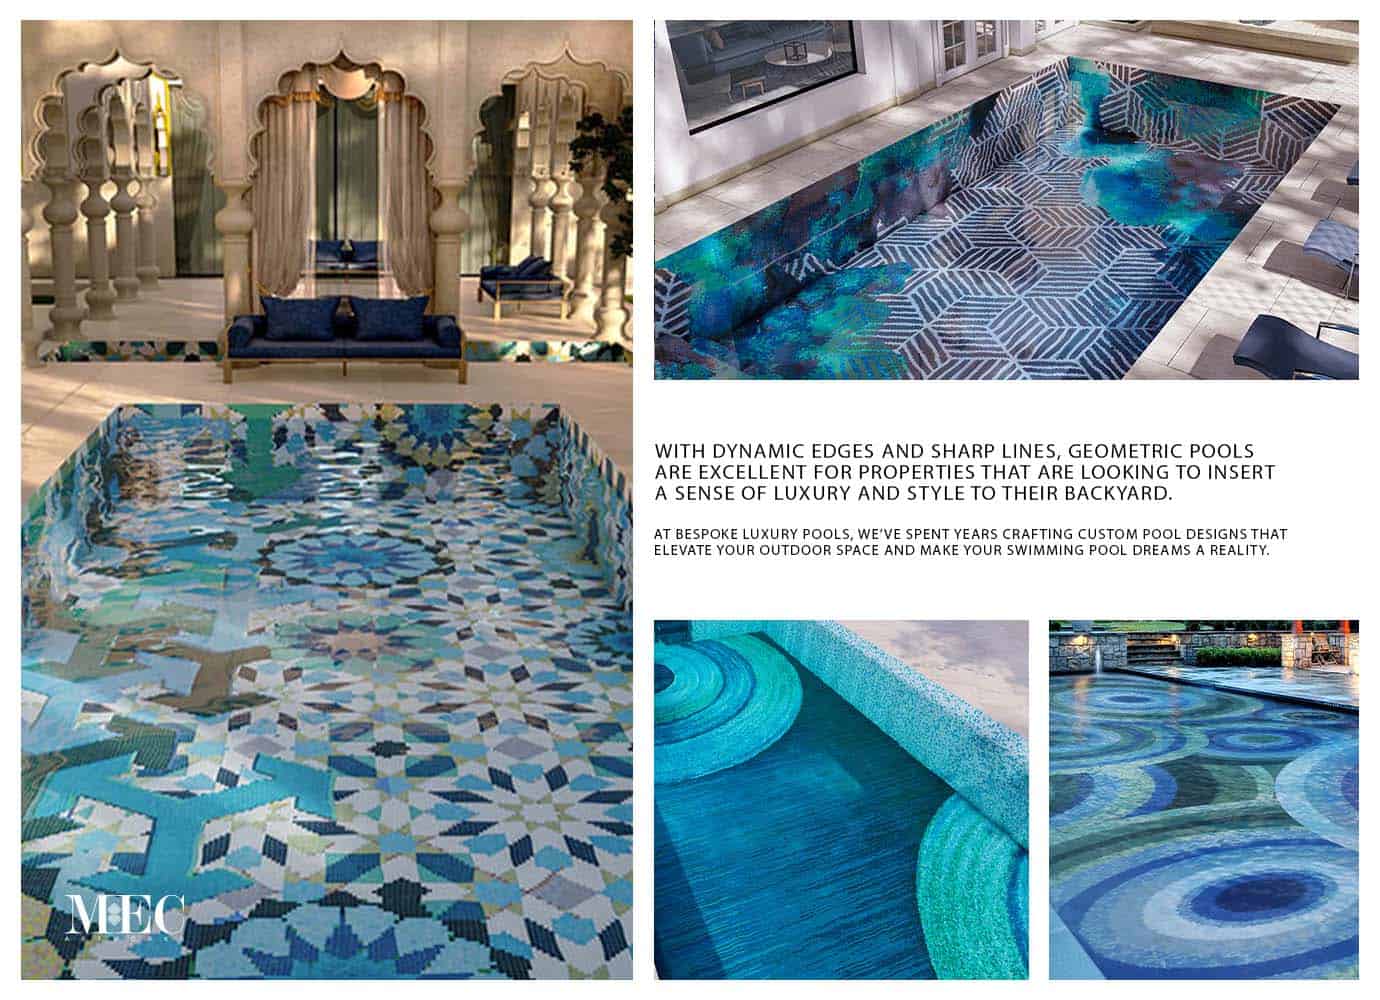 A collage showcasing three geometric-patterned swimming pools; two featuring blue and white mosaic designs and one with circular patterns. Highlighting that these luxury geometric pools, designed by MEC, offer timeless beauty and add style to backyards while also being a long-lasting investment.